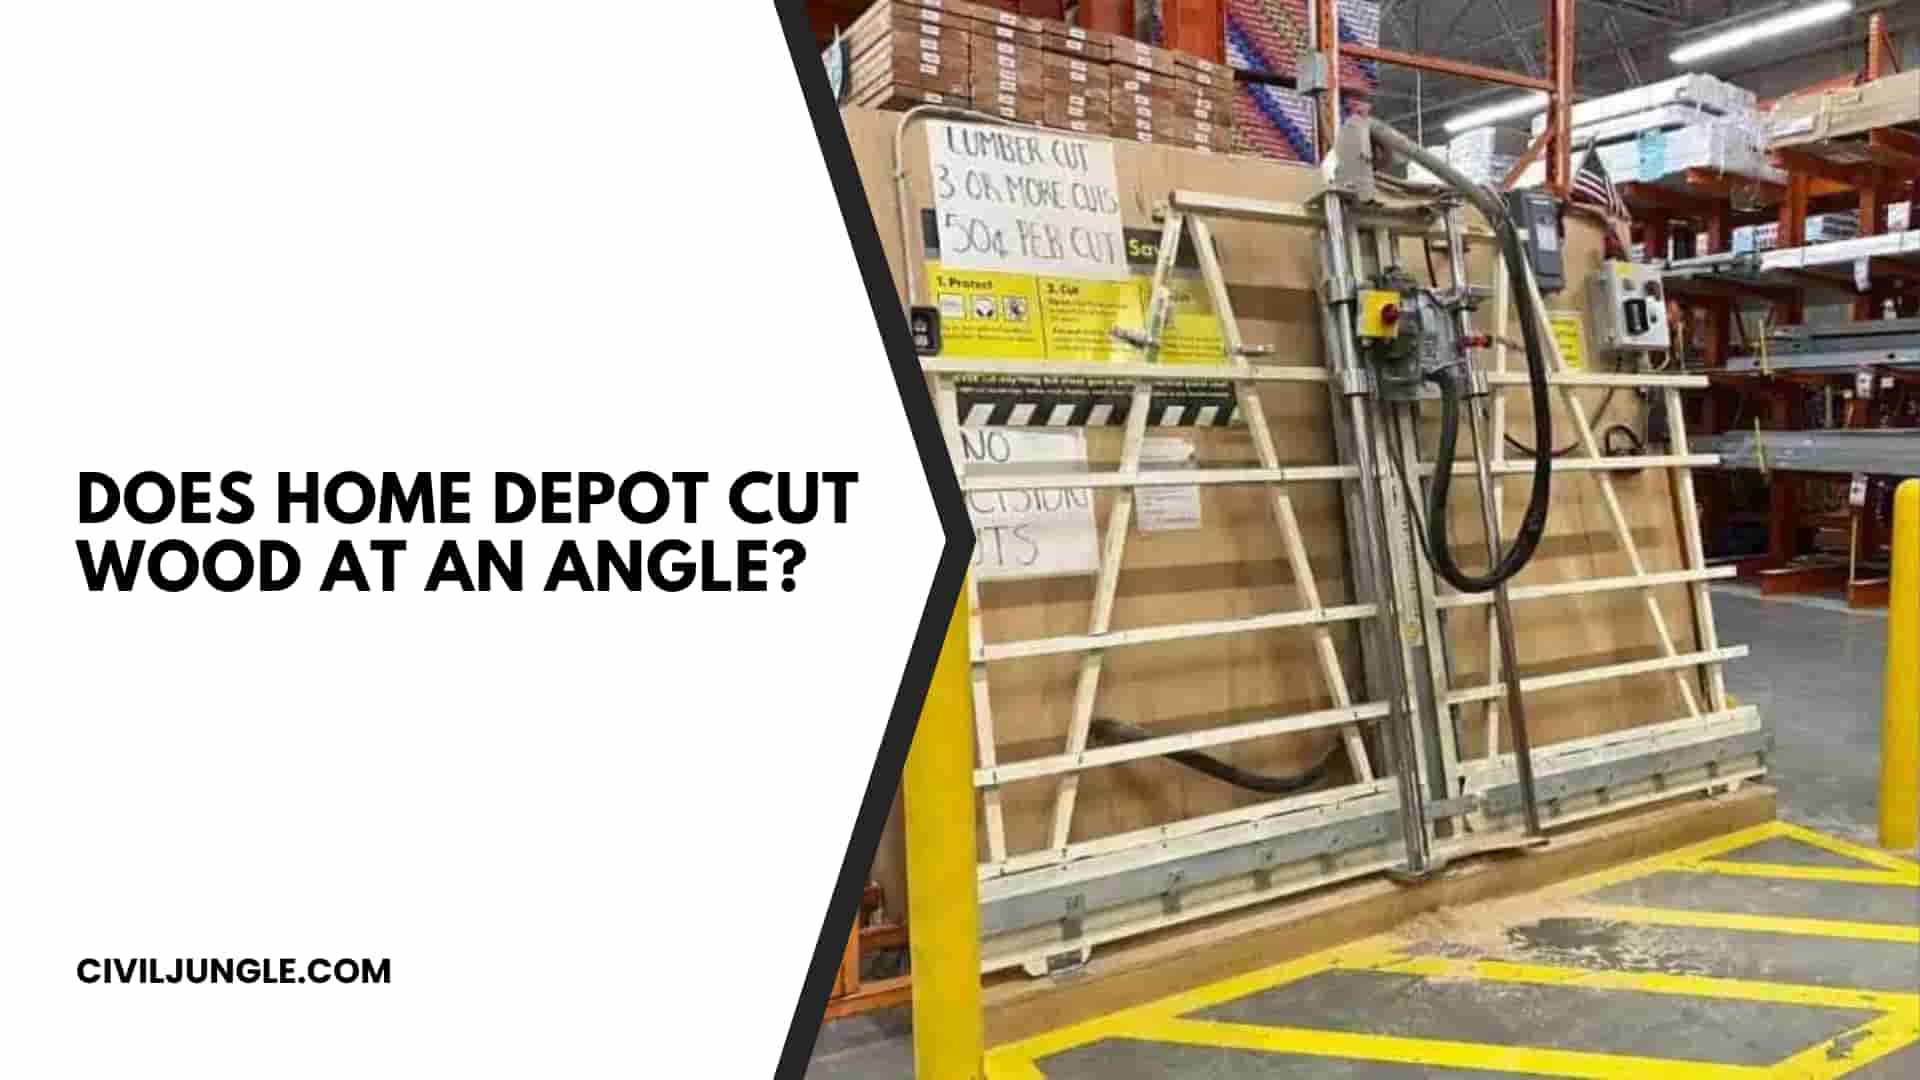 Does Home Depot Cut Wood At An Angle?